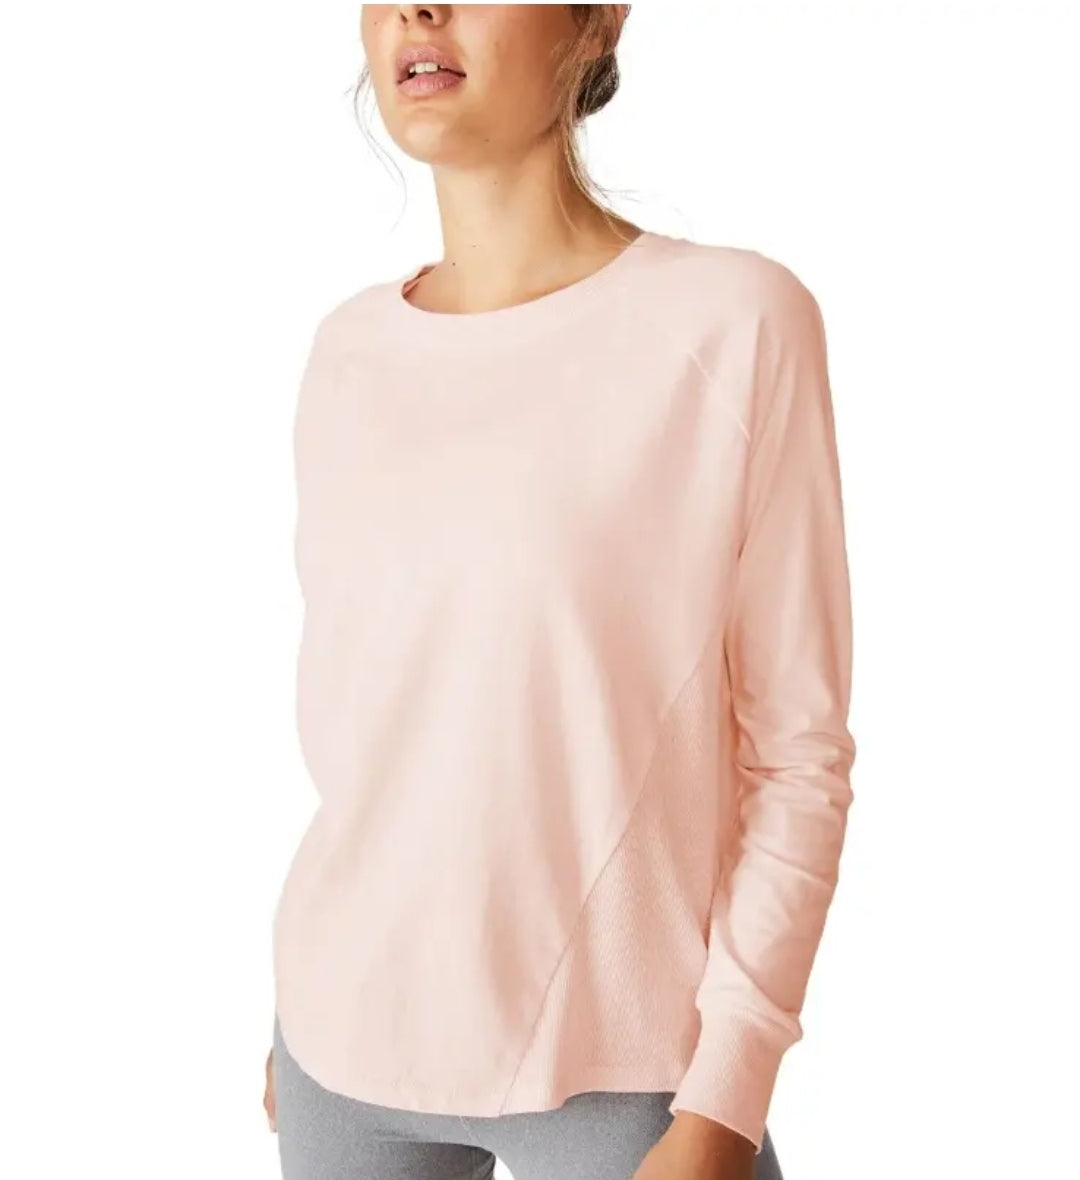 Cotton On Women's Active Rib Long Sleeve Top Pink Size XL XL by Brands Overstock | Brands Overstock